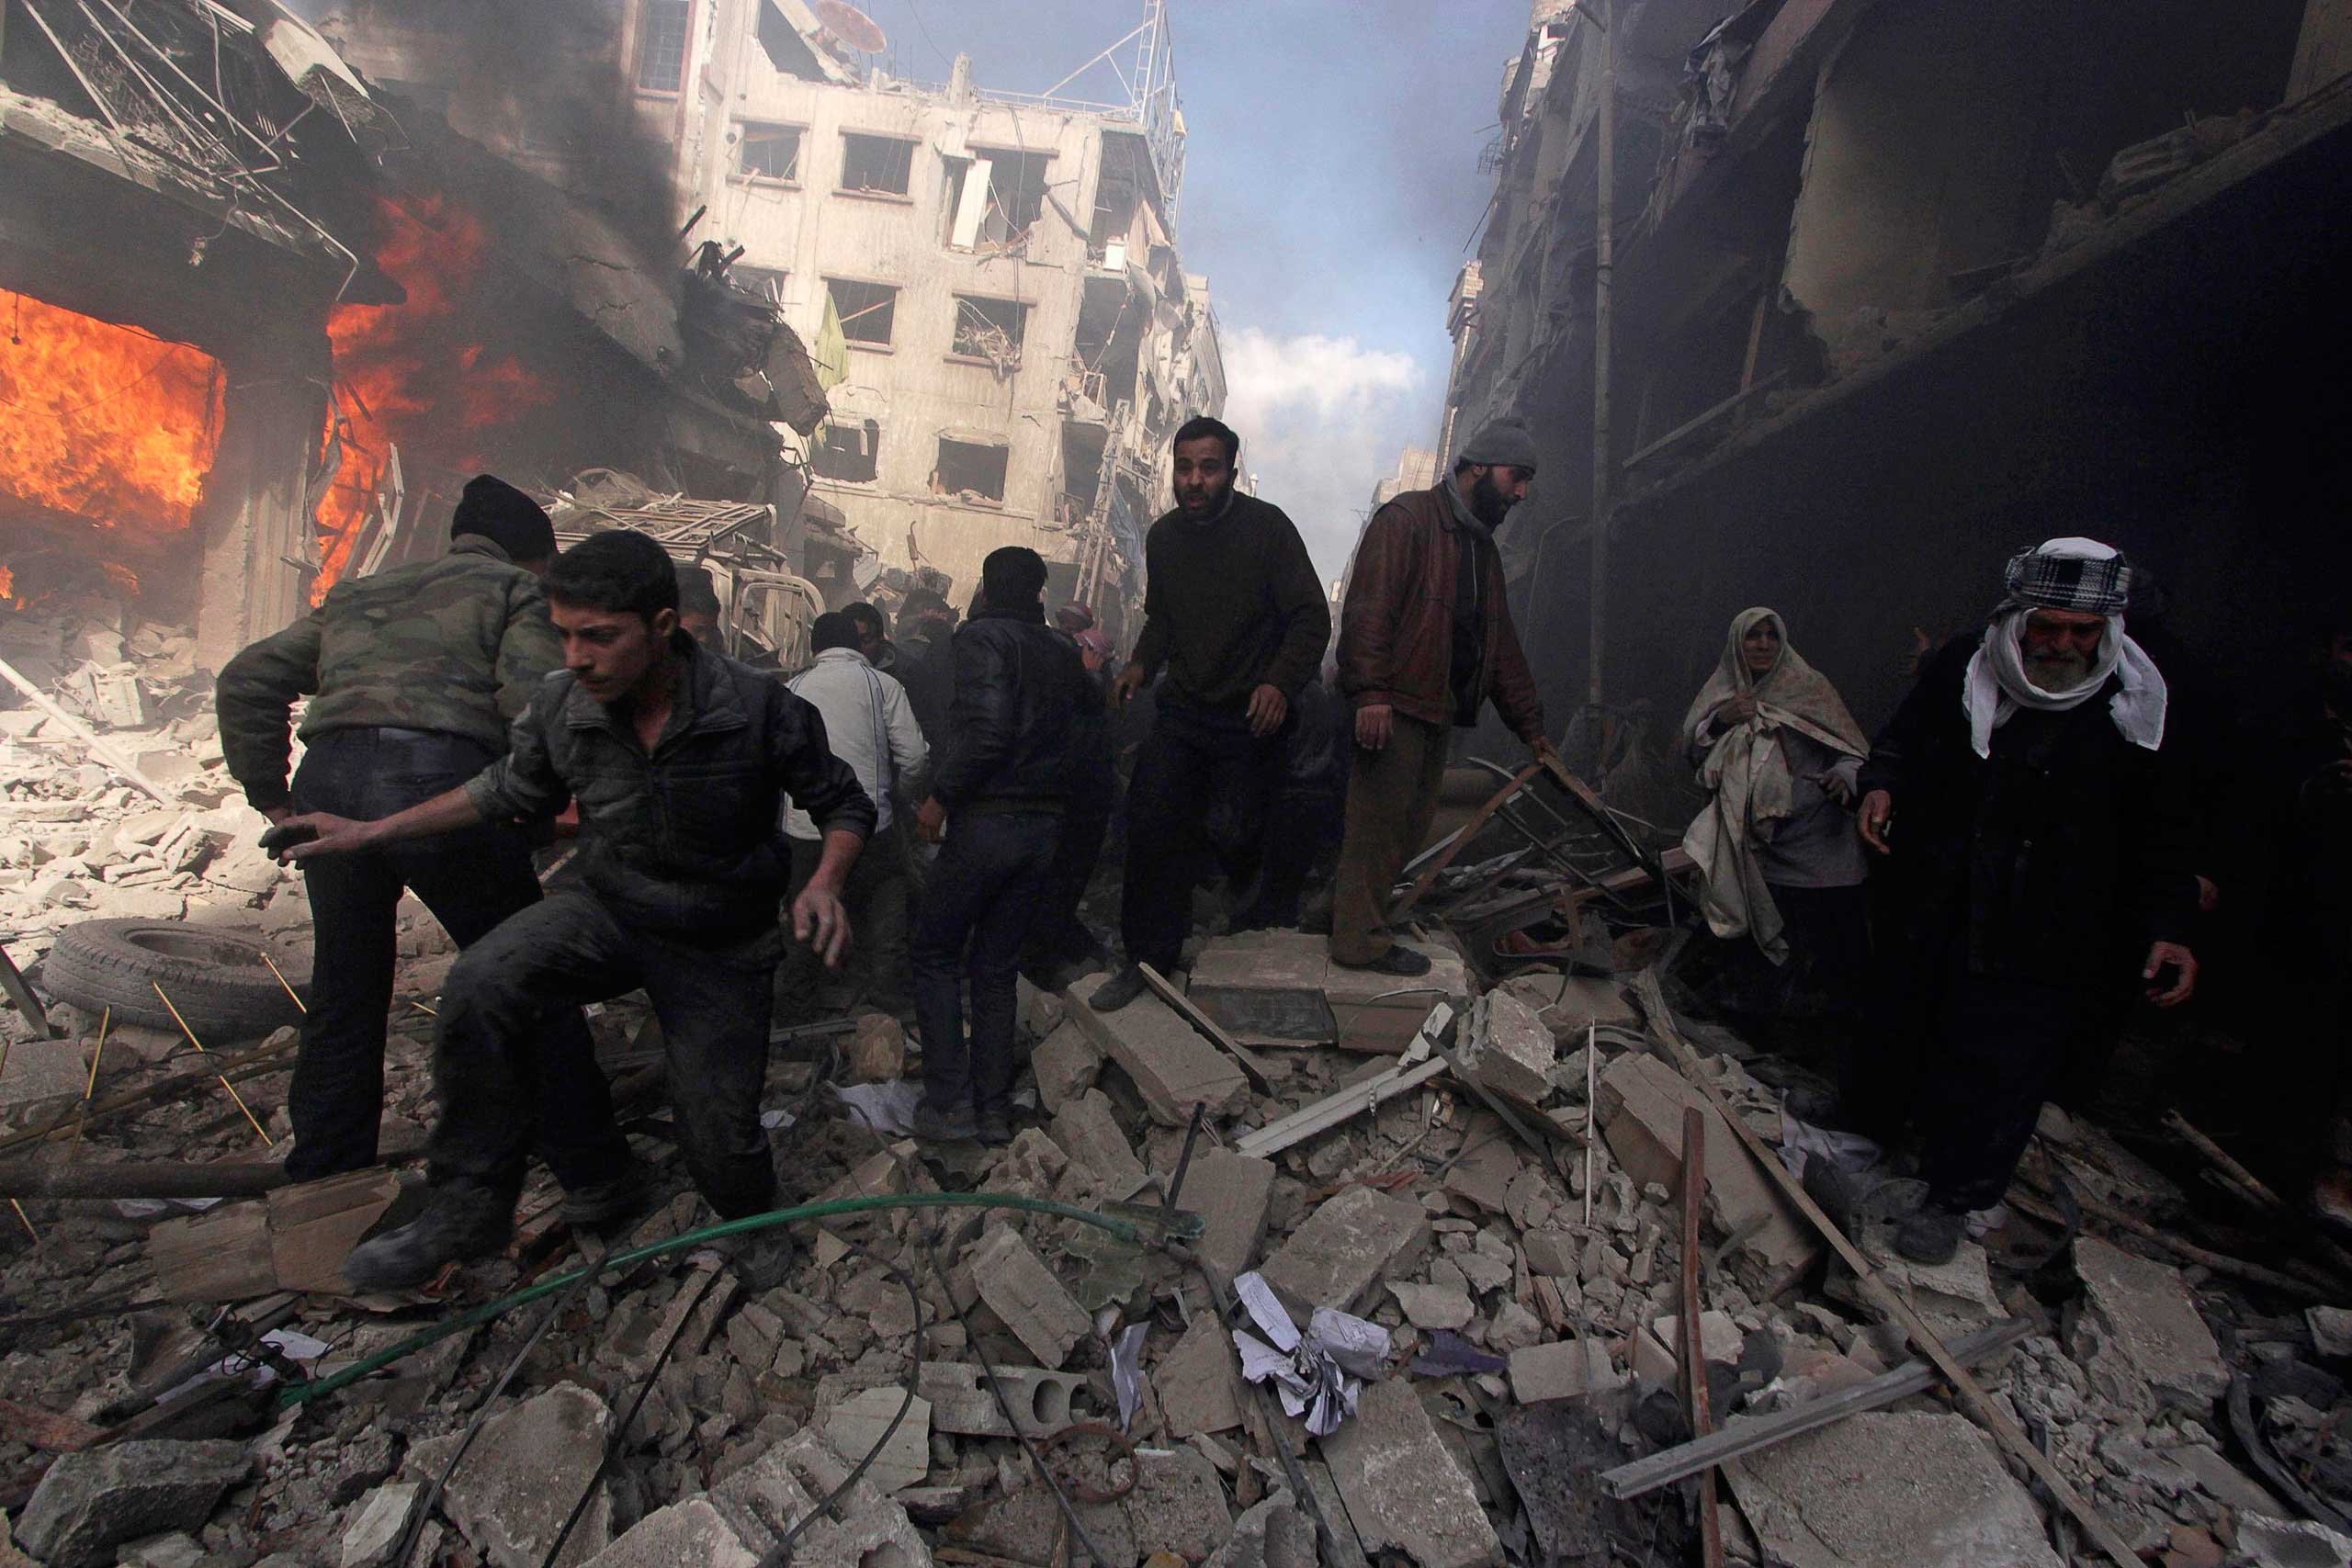 Feb. 9, 2015. People walk on rubble as others try to put out a fire after what activists said were airstrikes followed by shelling by forces loyal to Syria's President Bashar al-Assad in the Douma neighborhood of Damascus.